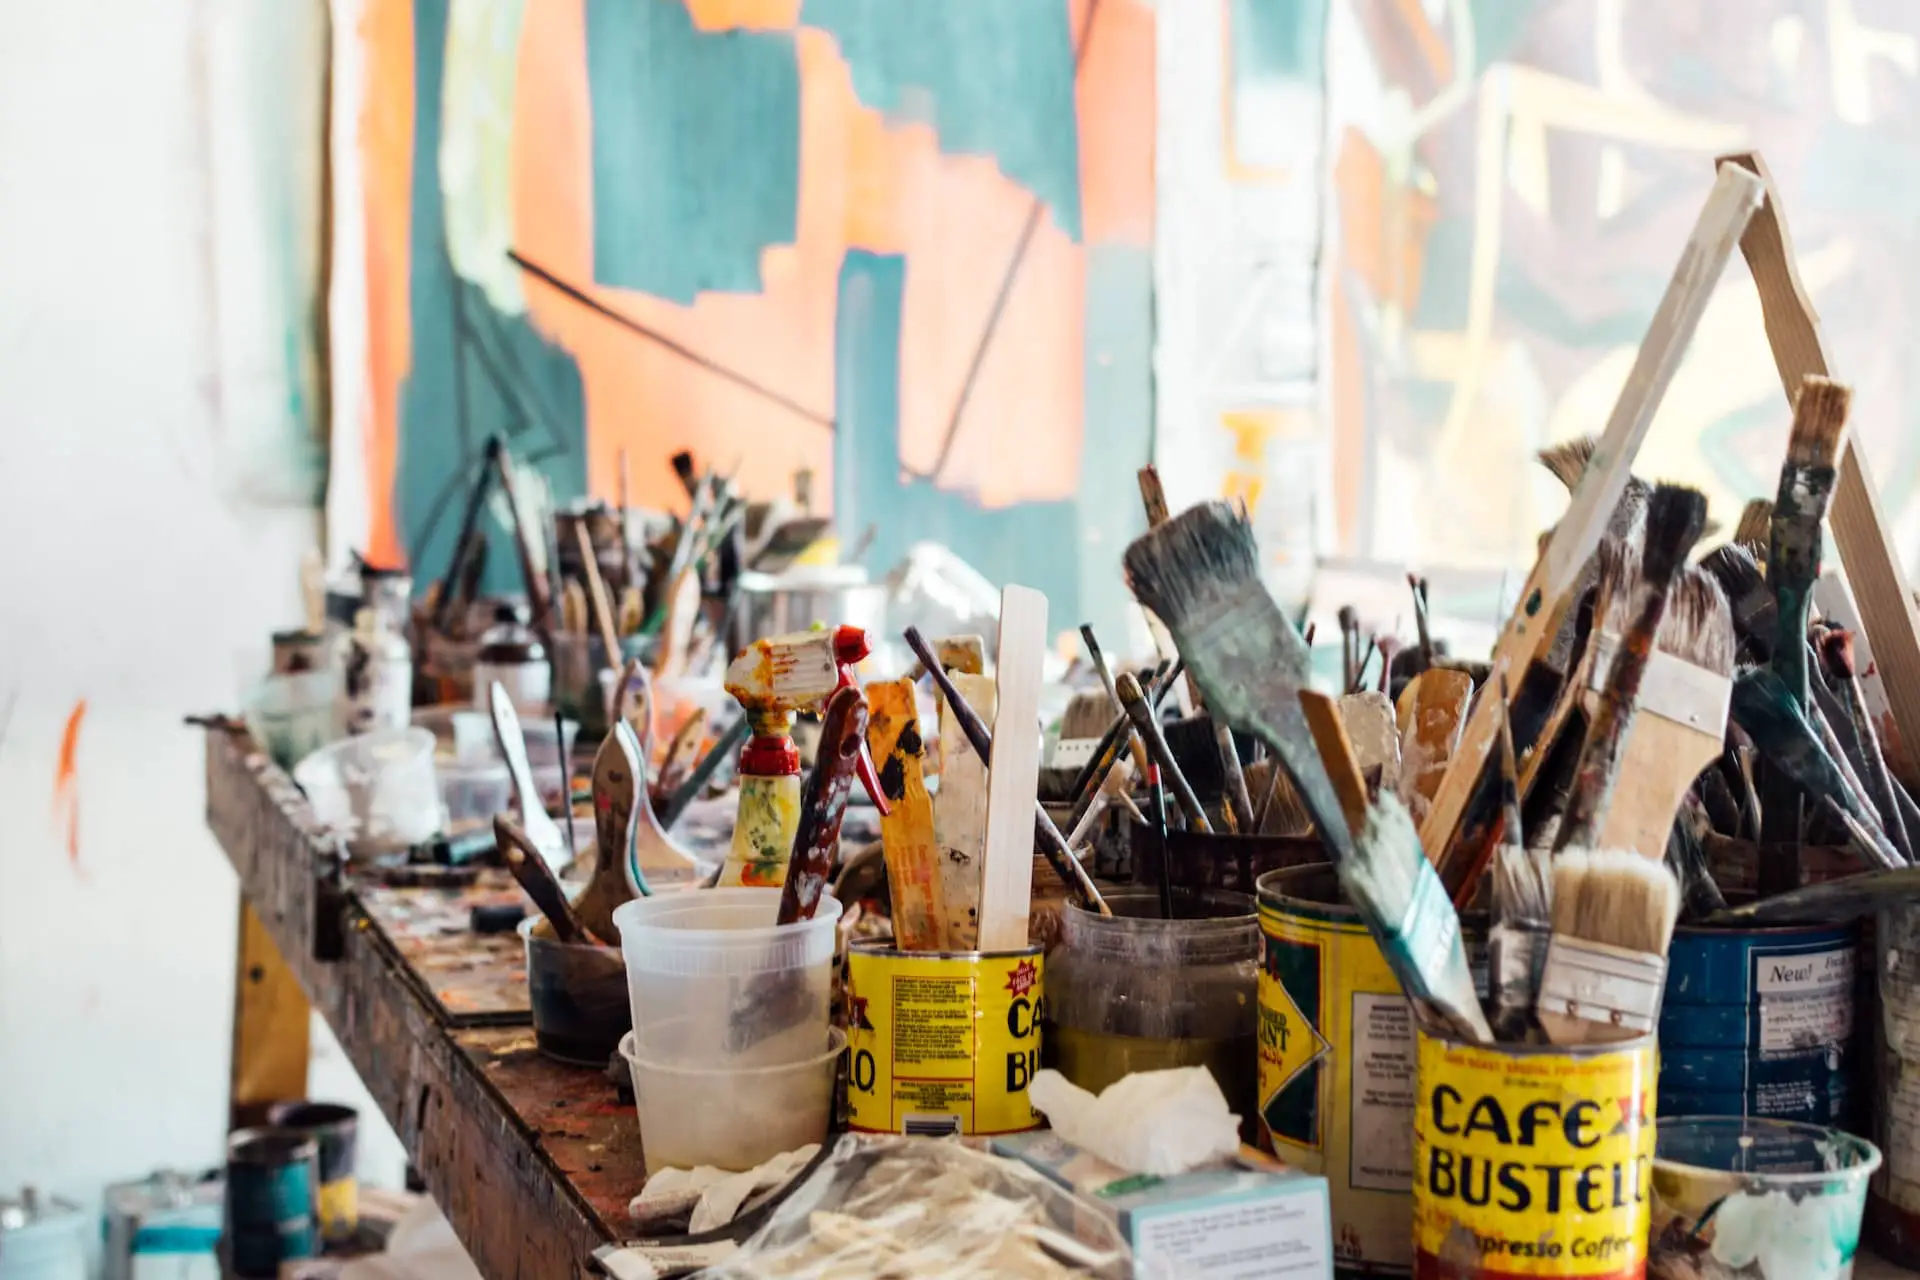 Pots of paint brushes on table with artworks in the background